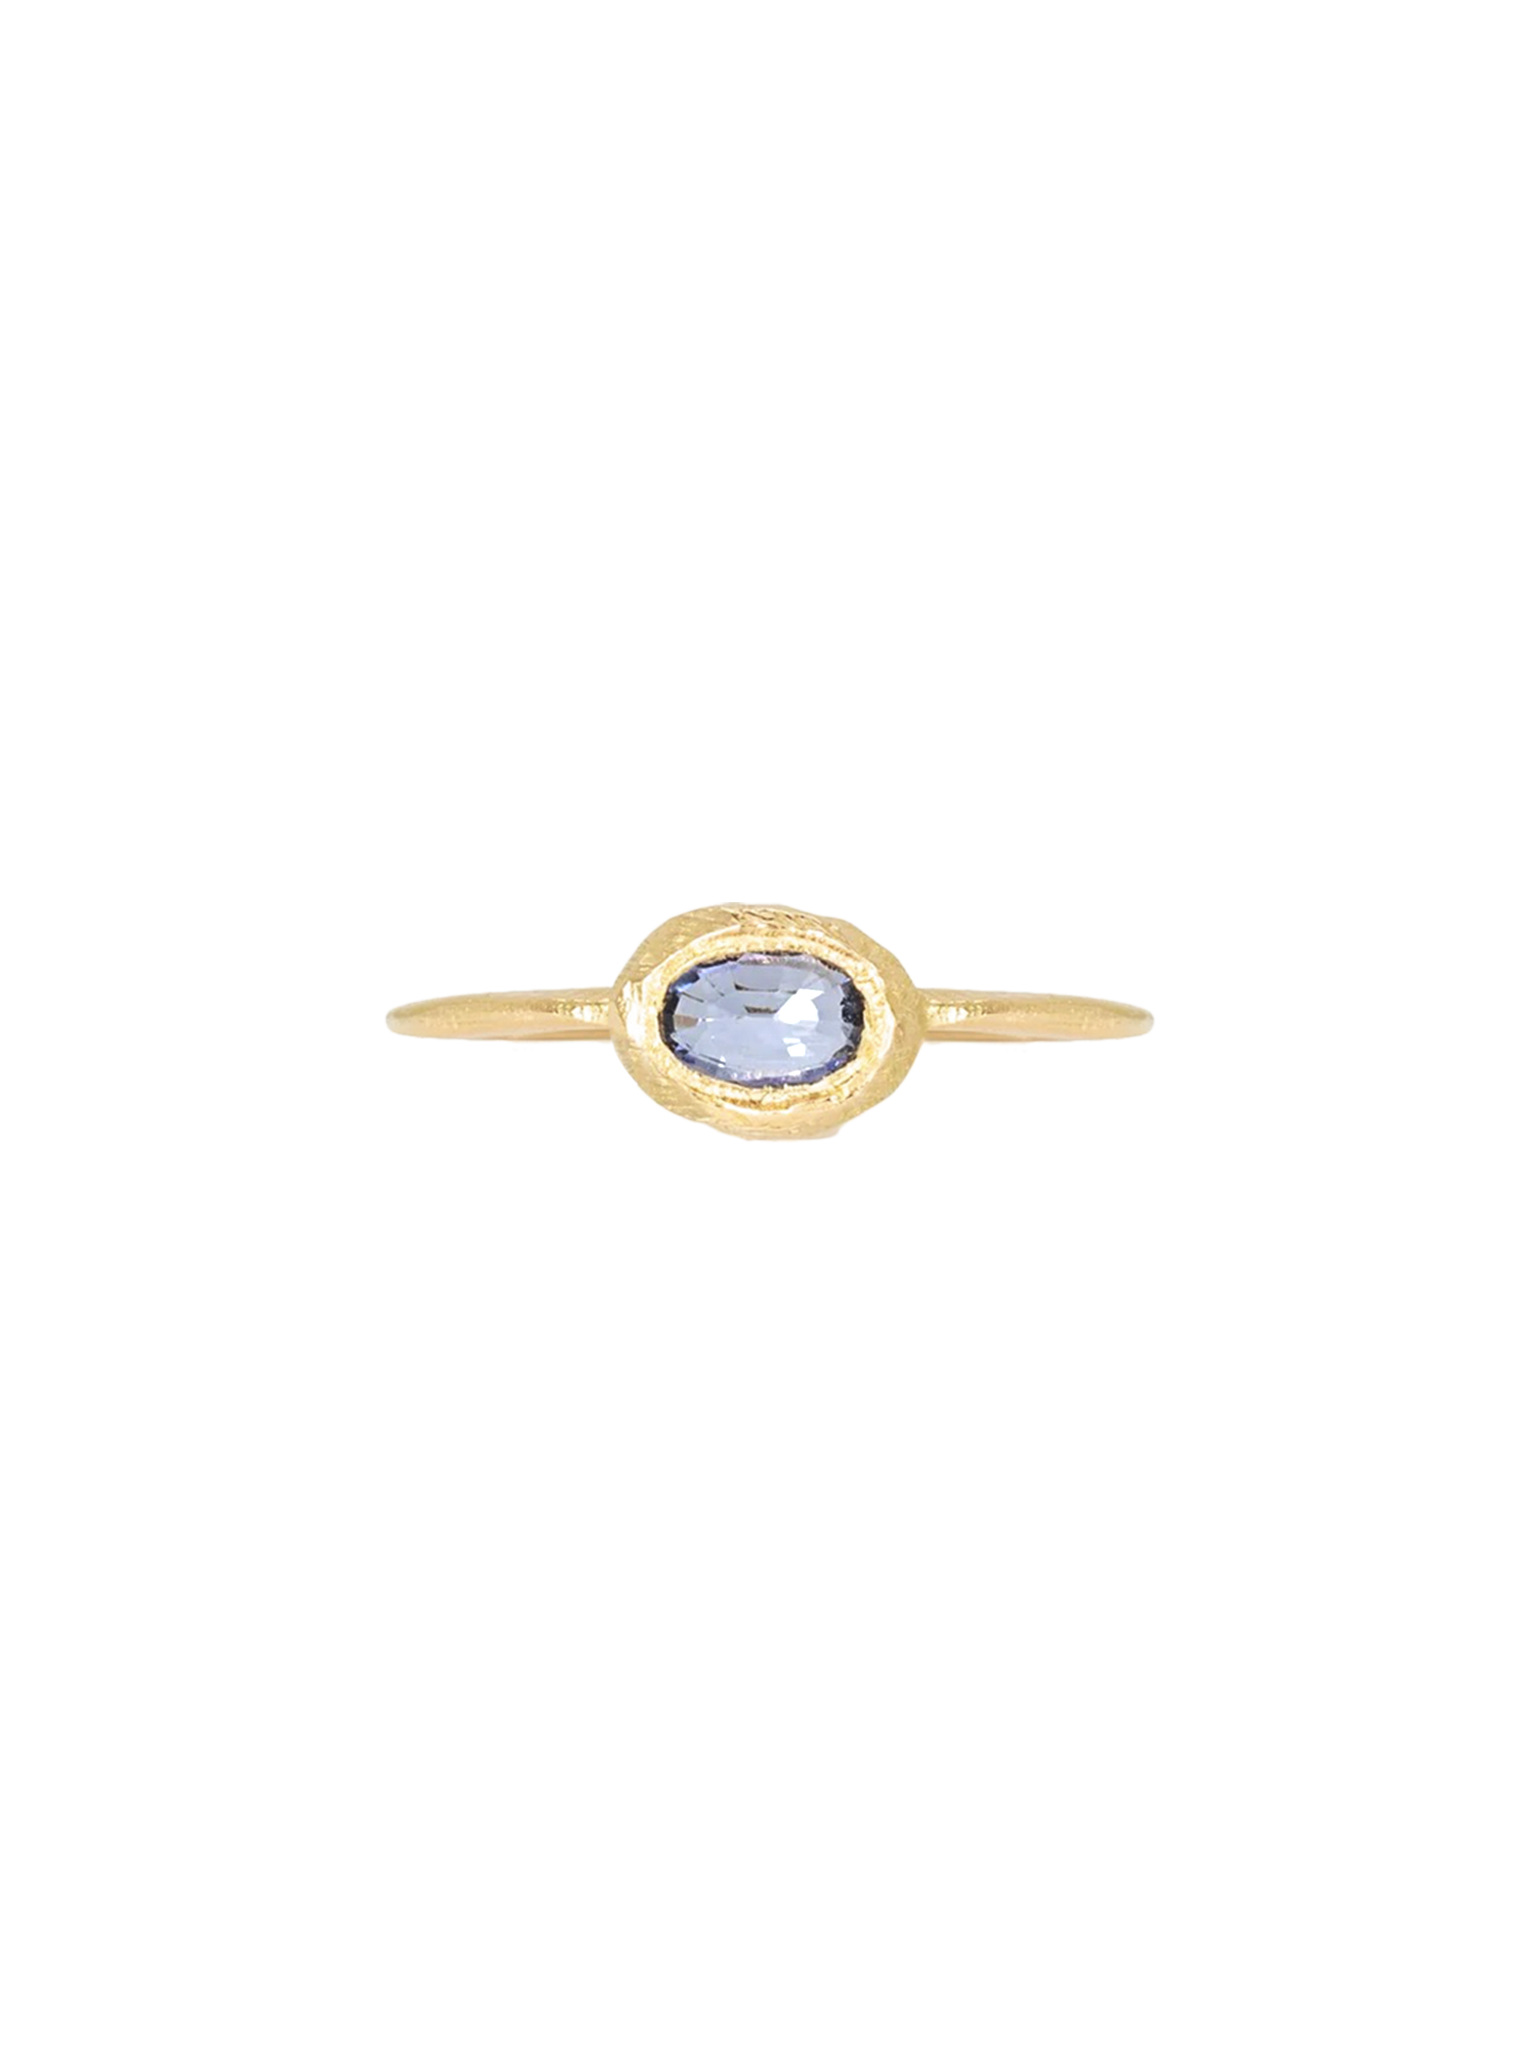 18k sapphire ring light blue sapphire by Page Sargisson | Finematter